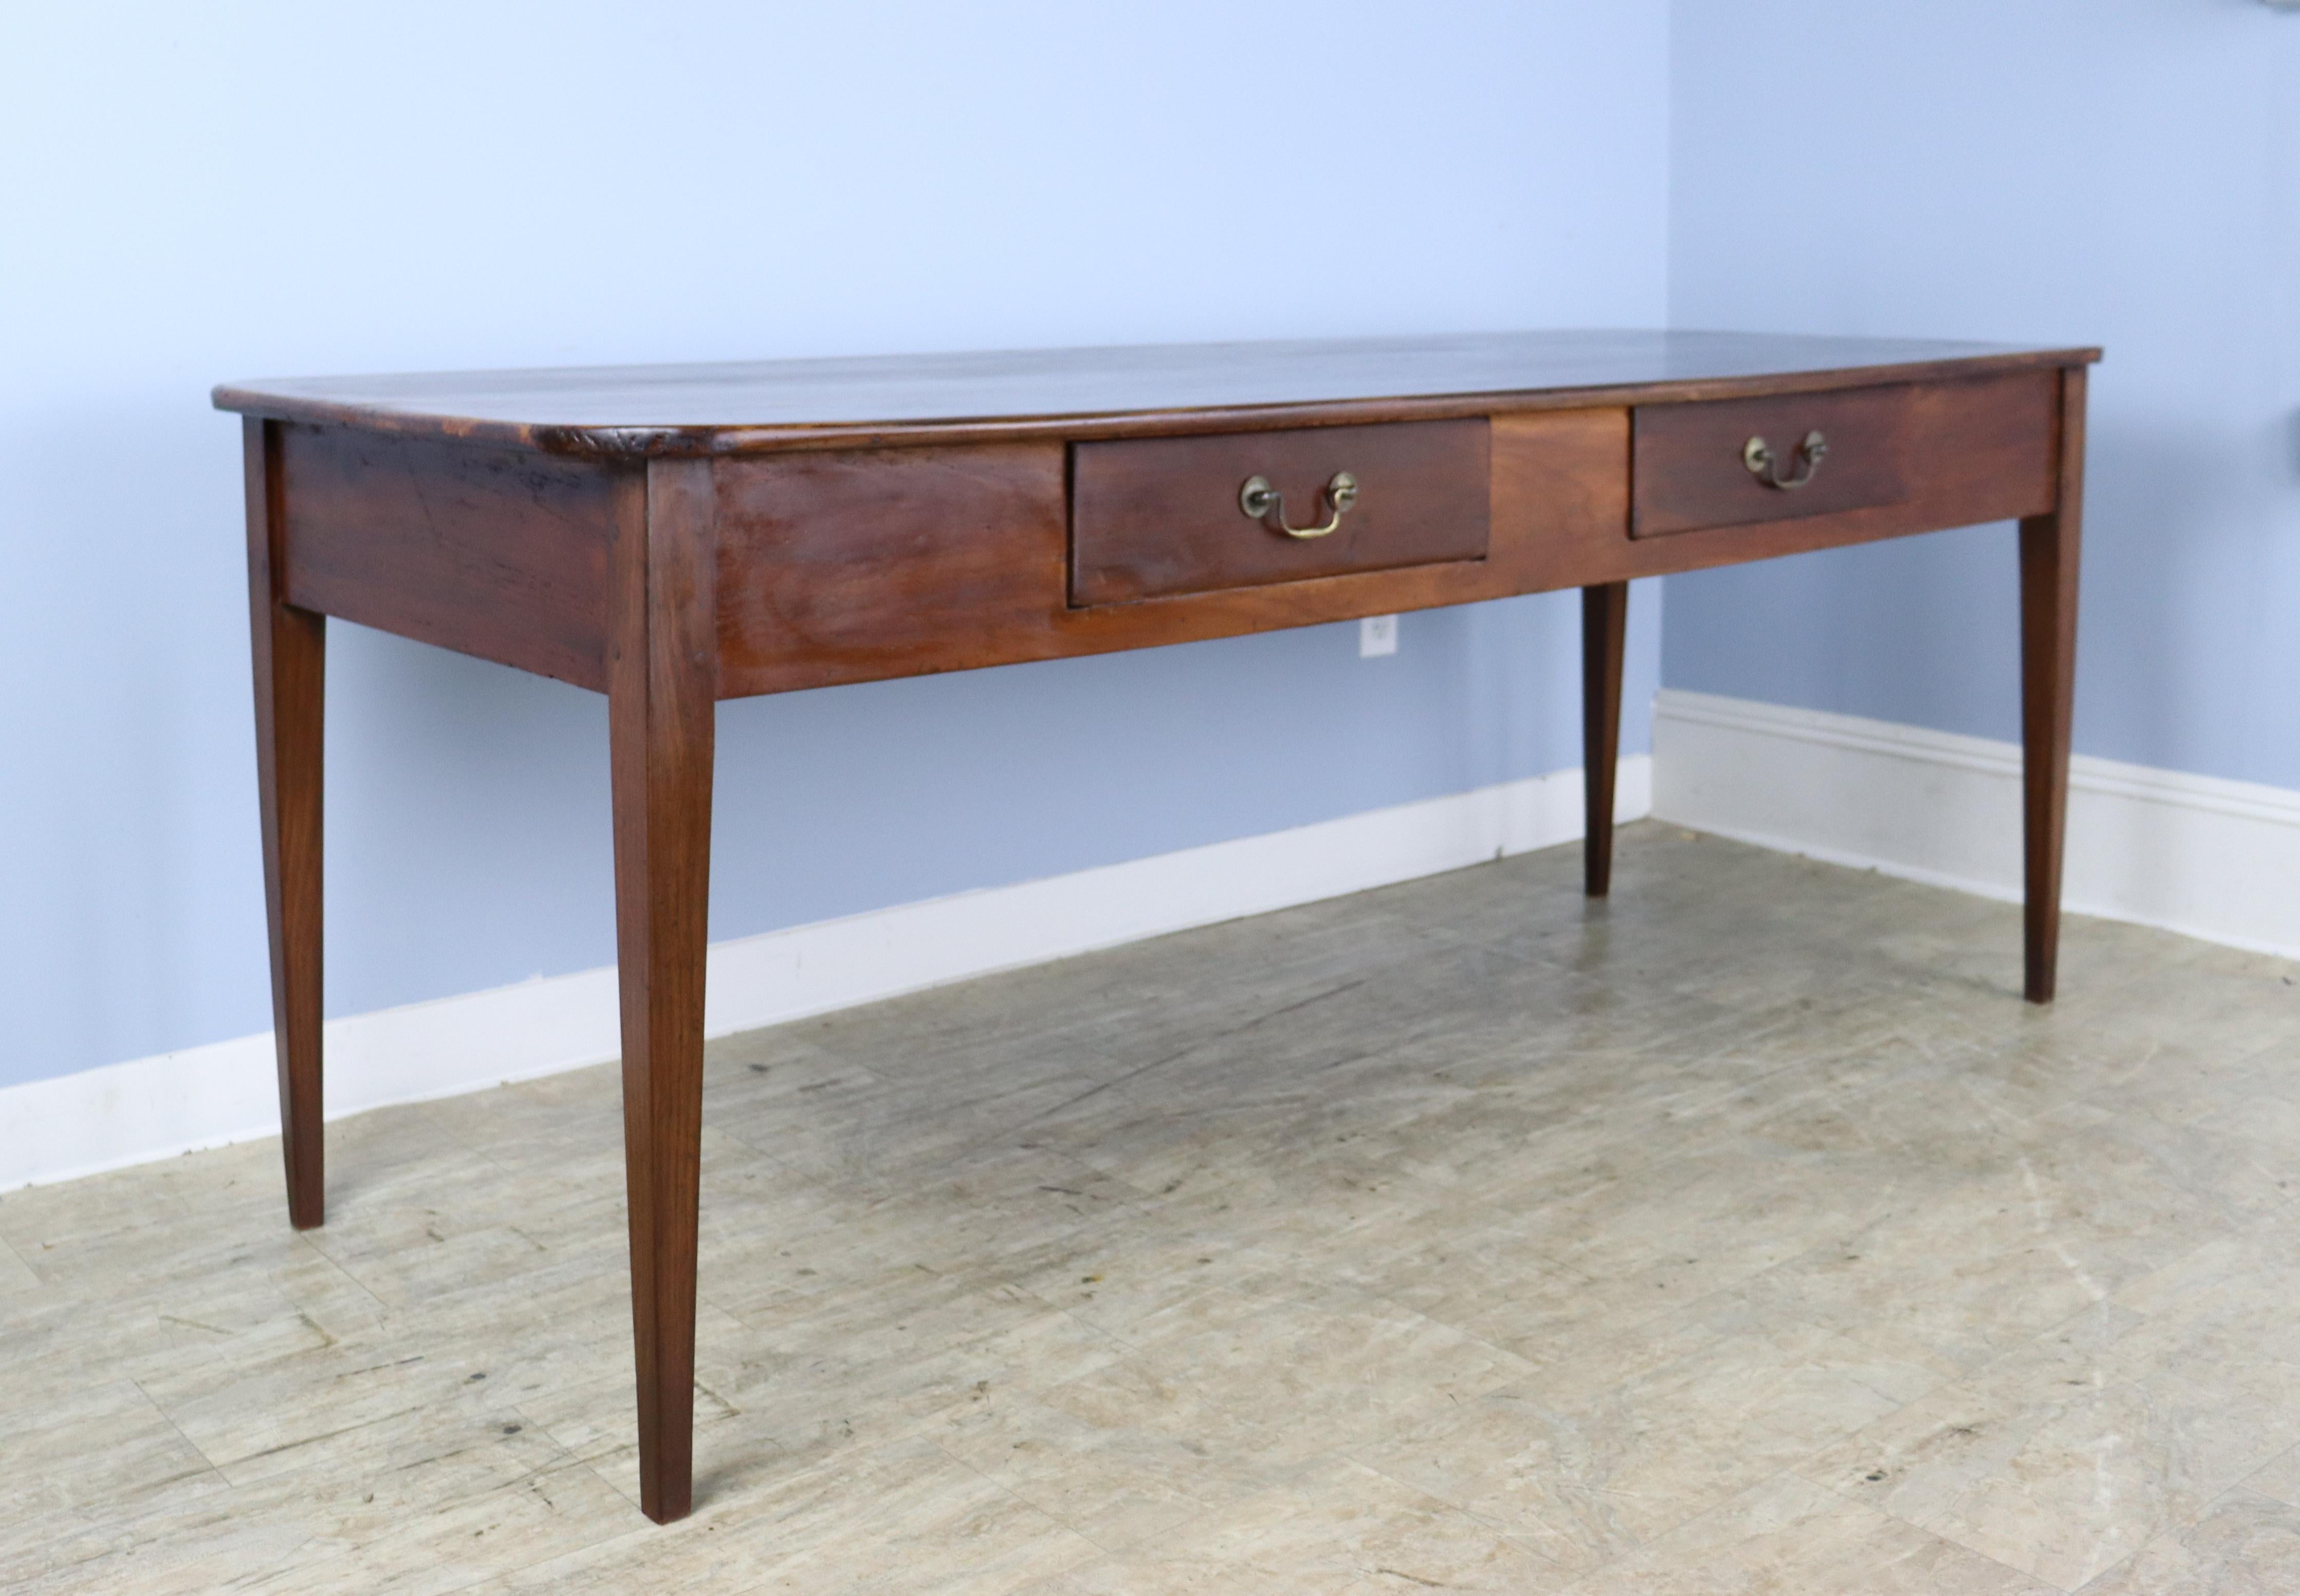 A handsome antique French farm table with a lovely top with hand cut rounded corners. The wood has very good color, grain and patina. Nicely tapered legs and two drawers in the extra deep apron, which measures 23.5 inches from the floor. There are